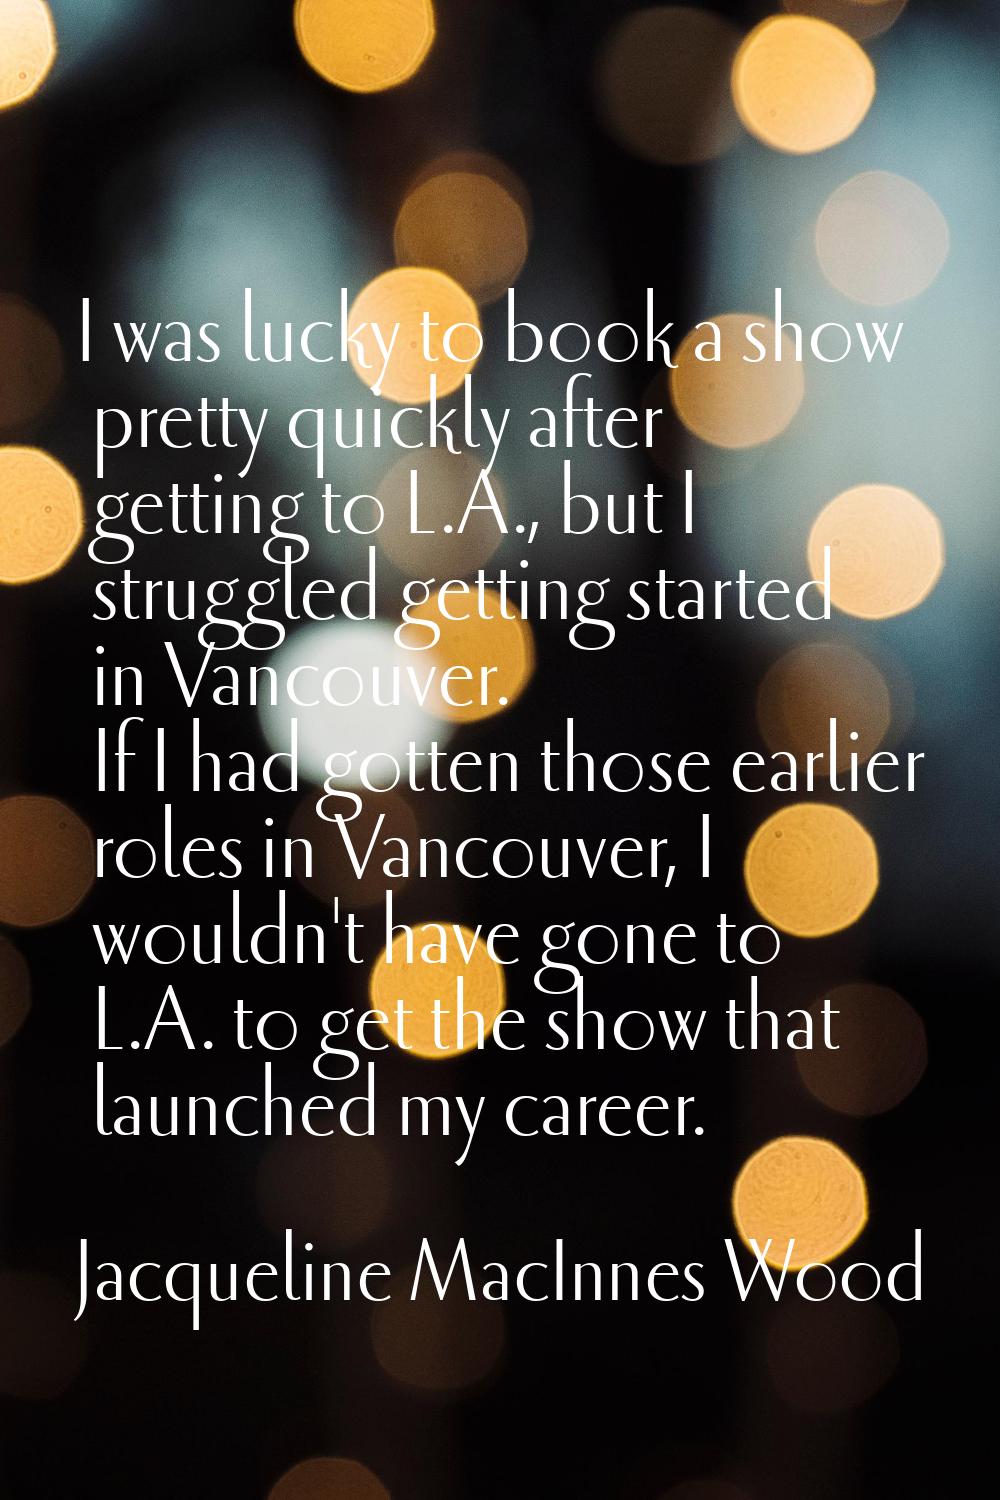 I was lucky to book a show pretty quickly after getting to L.A., but I struggled getting started in